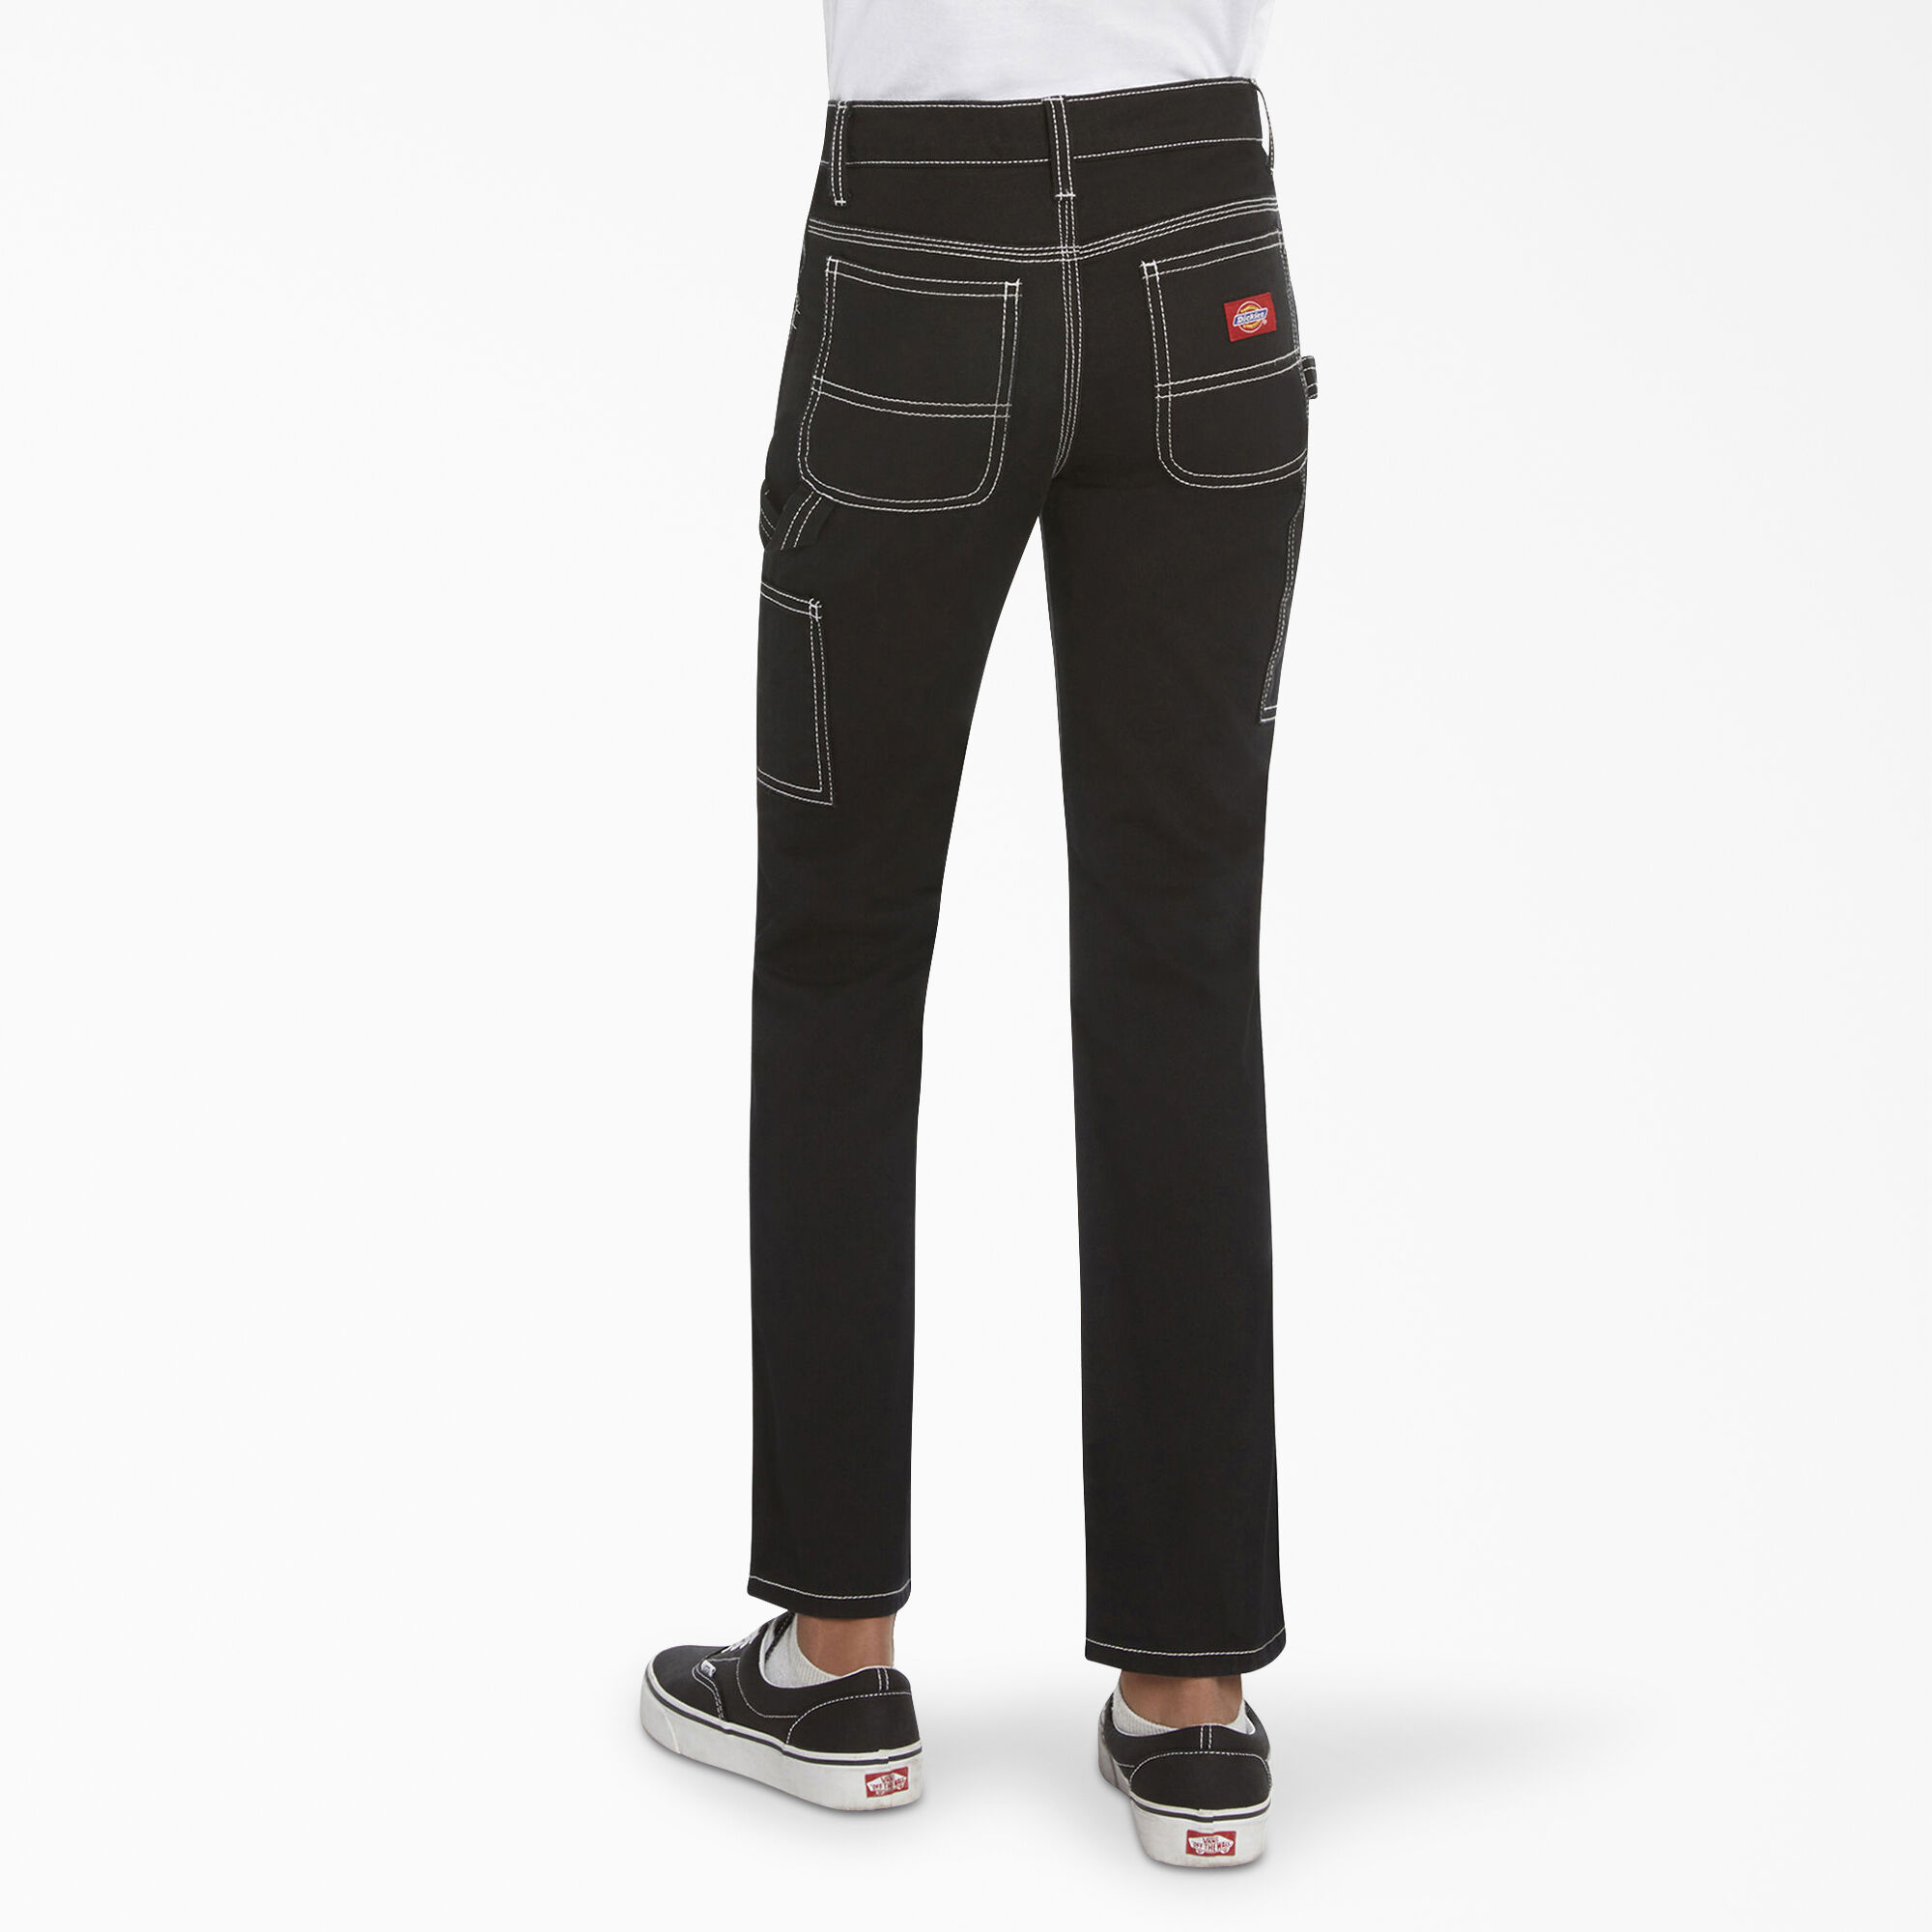 dickies big and tall carpenter jeans